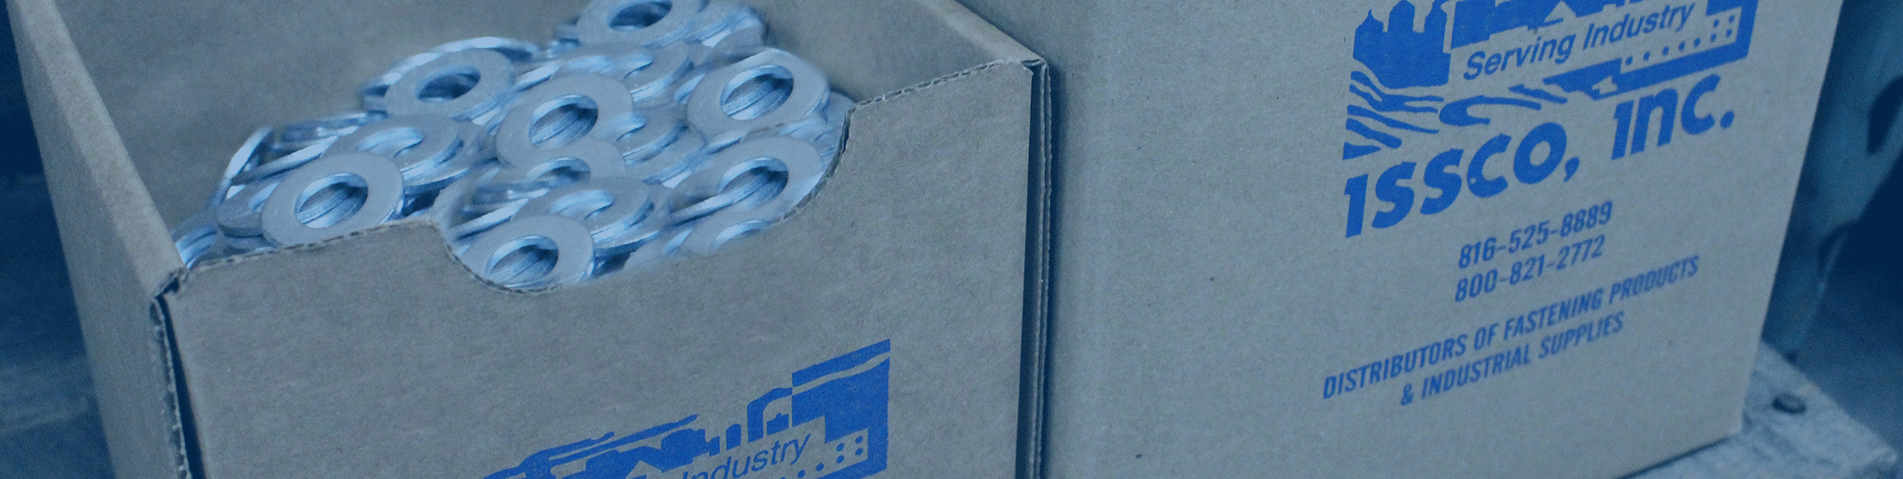 fasteners in an ISSCO brand box